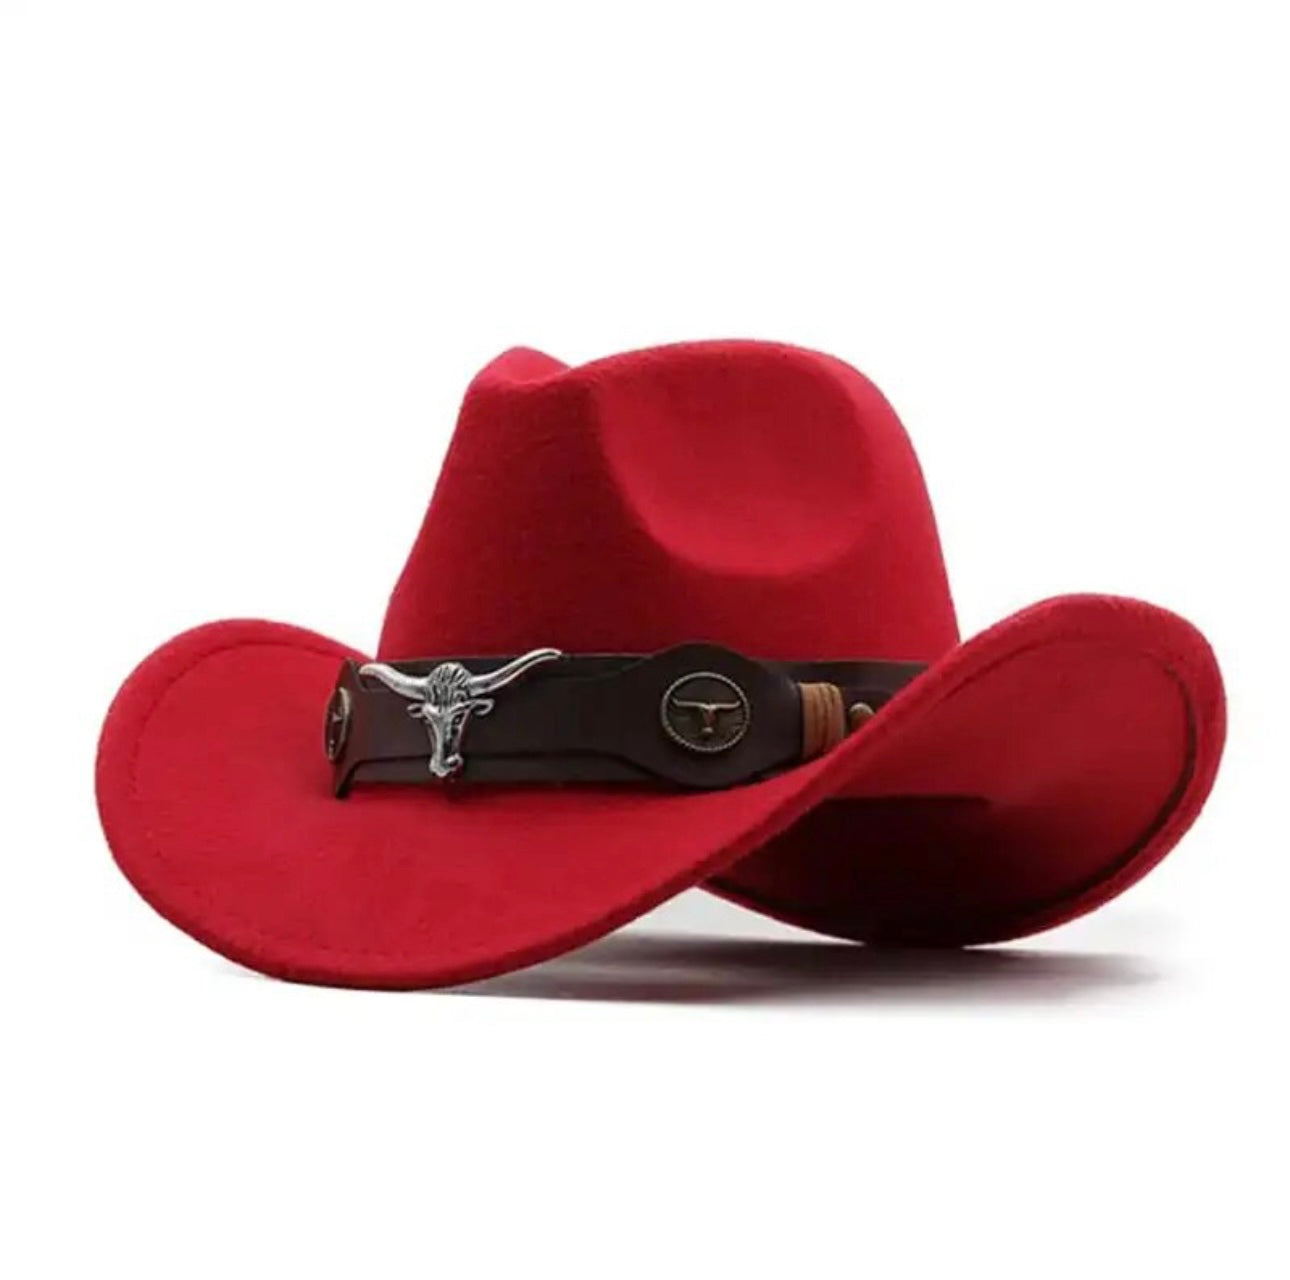 Jazzy Cowgirl Hats (Comes In Other Colors)